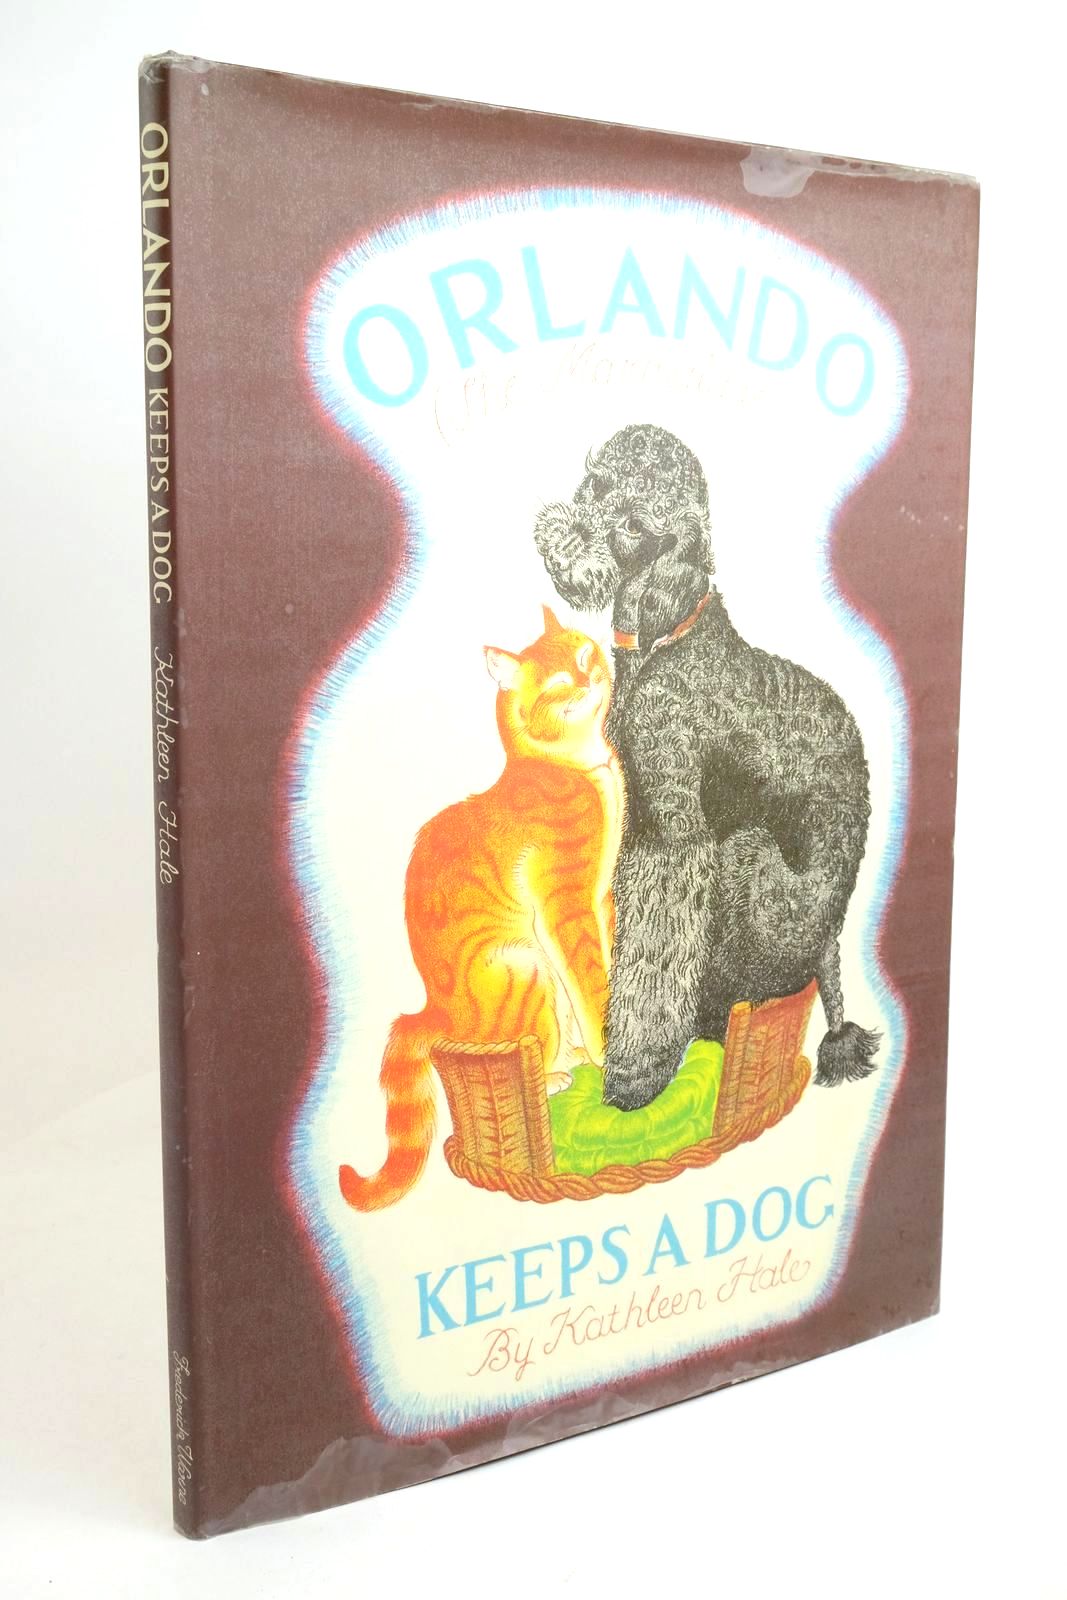 Photo of ORLANDO (THE MARMALADE CAT) KEEPS A DOG written by Hale, Kathleen published by Frederick Warne (STOCK CODE: 1322174)  for sale by Stella & Rose's Books